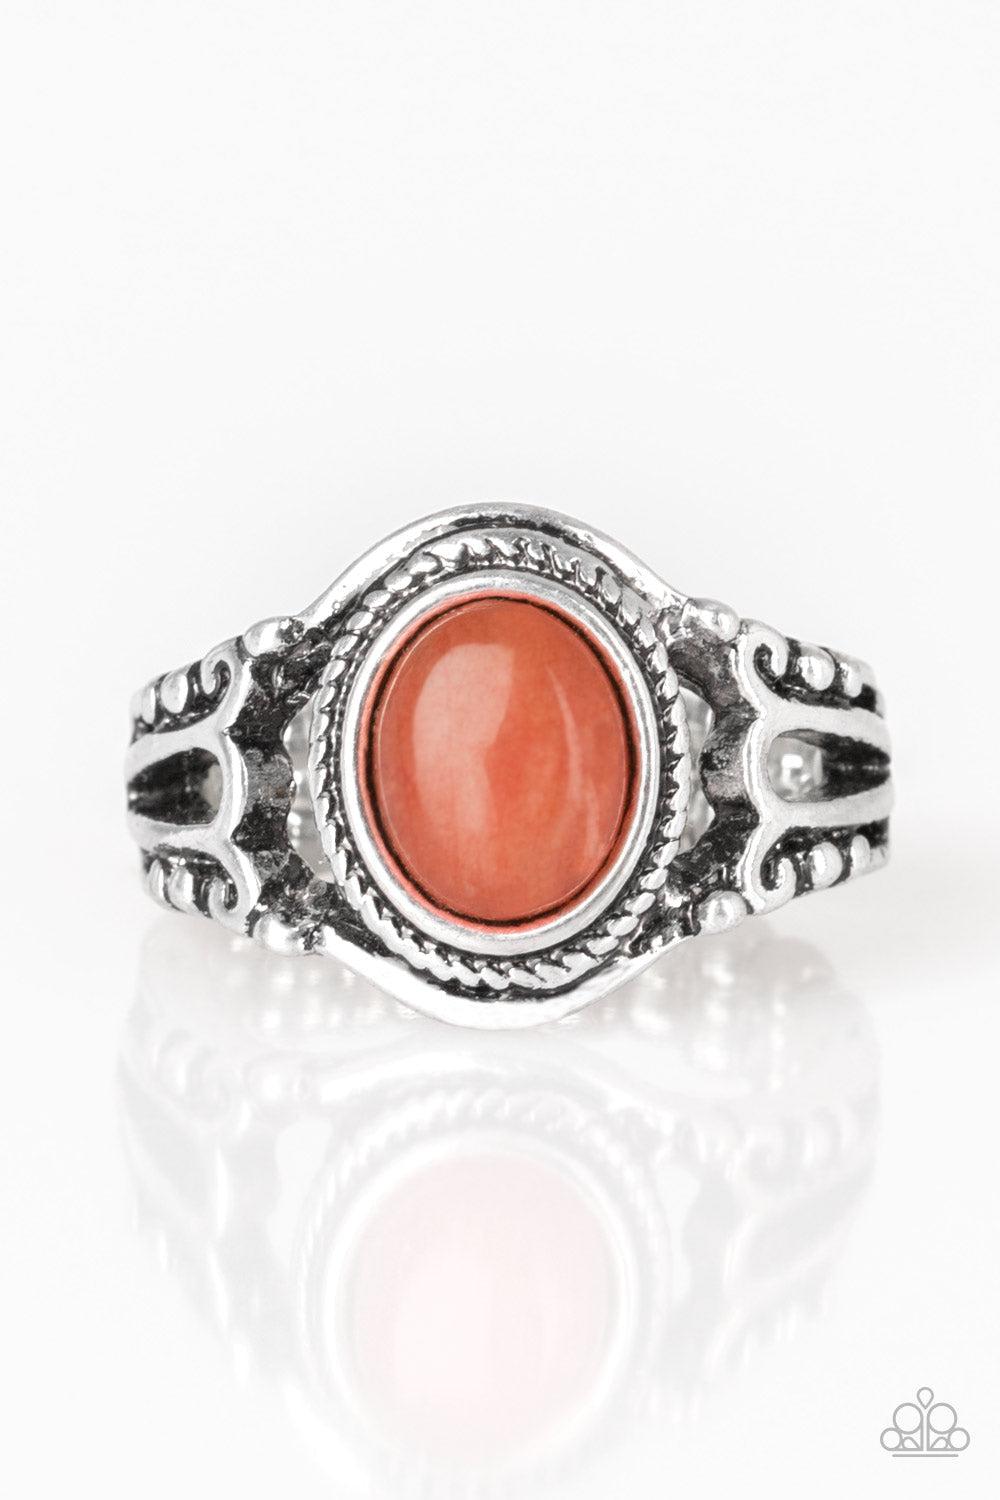 Peacefully Peaceful Orange Cat&#39;s Eye Stone Ring - Paparazzi Accessories- lightbox - CarasShop.com - $5 Jewelry by Cara Jewels